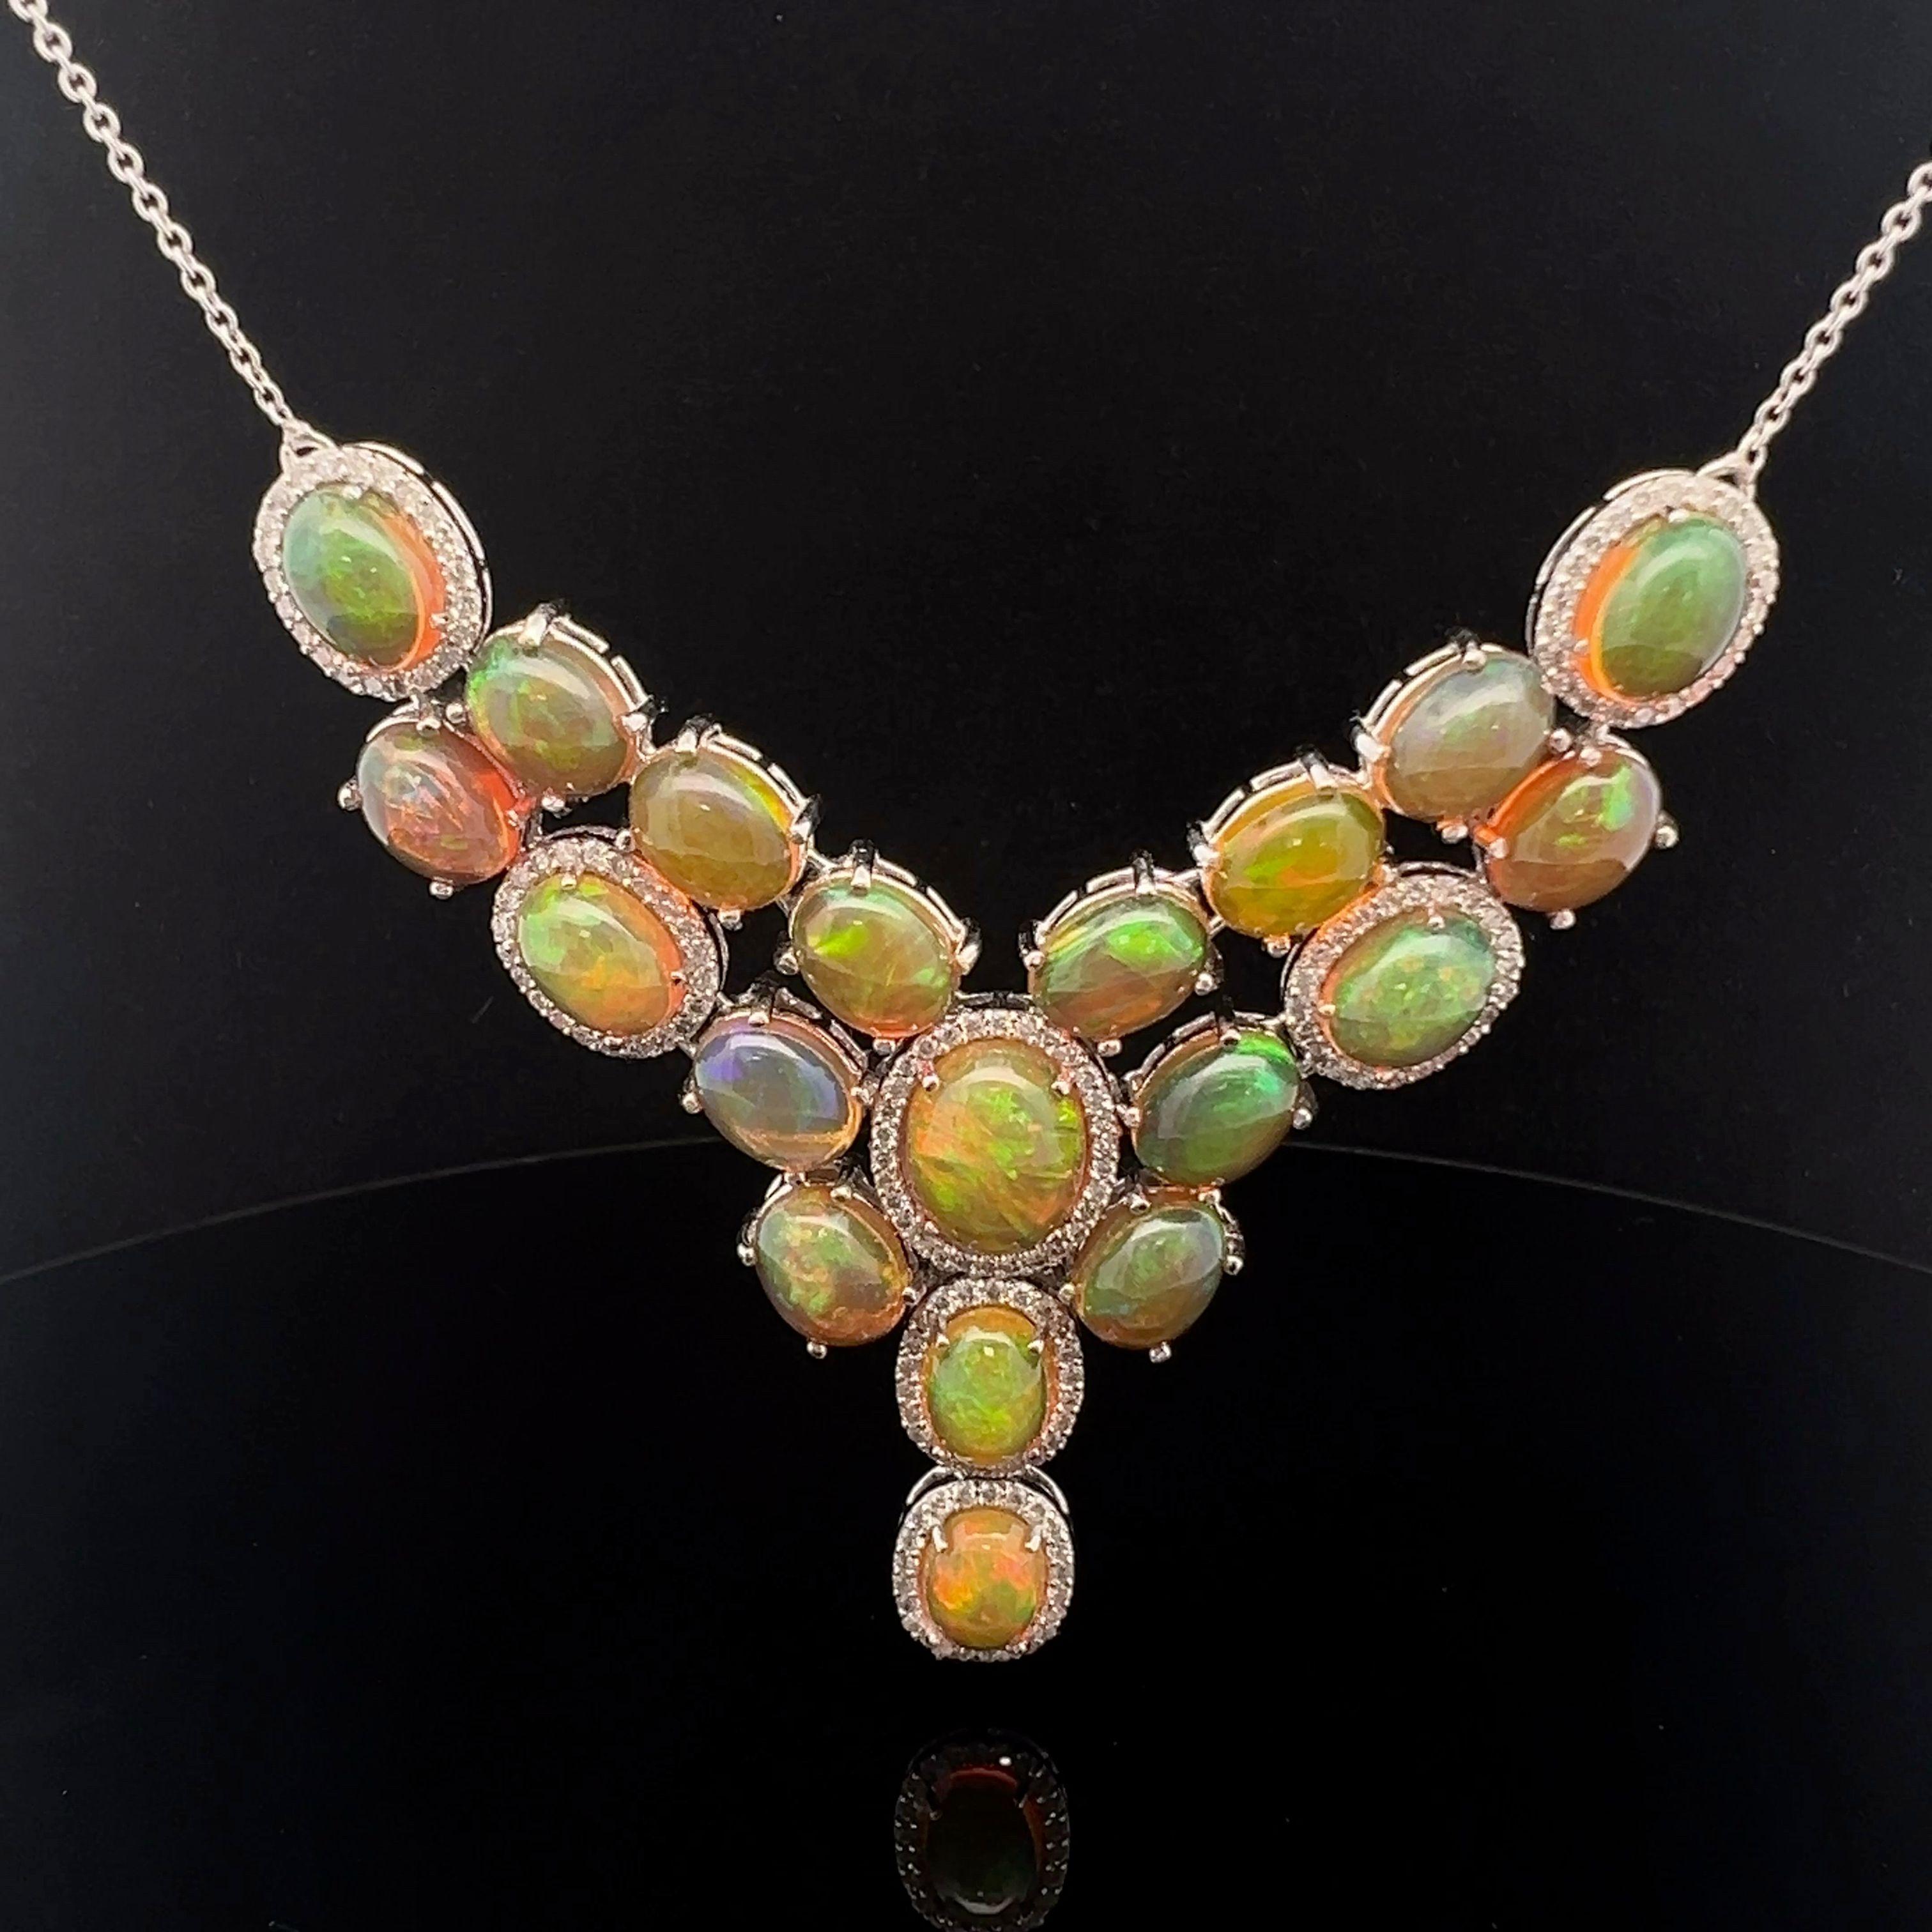 An magnificent necklace made from 16.30-carat natural opal and 1.37-carat diamond, set in 18-karat white gold. 
Beautiful 18-karat white gold opal and diamond necklace, a sophisticated and elegant piece of beauty. This gorgeous necklace has lovely